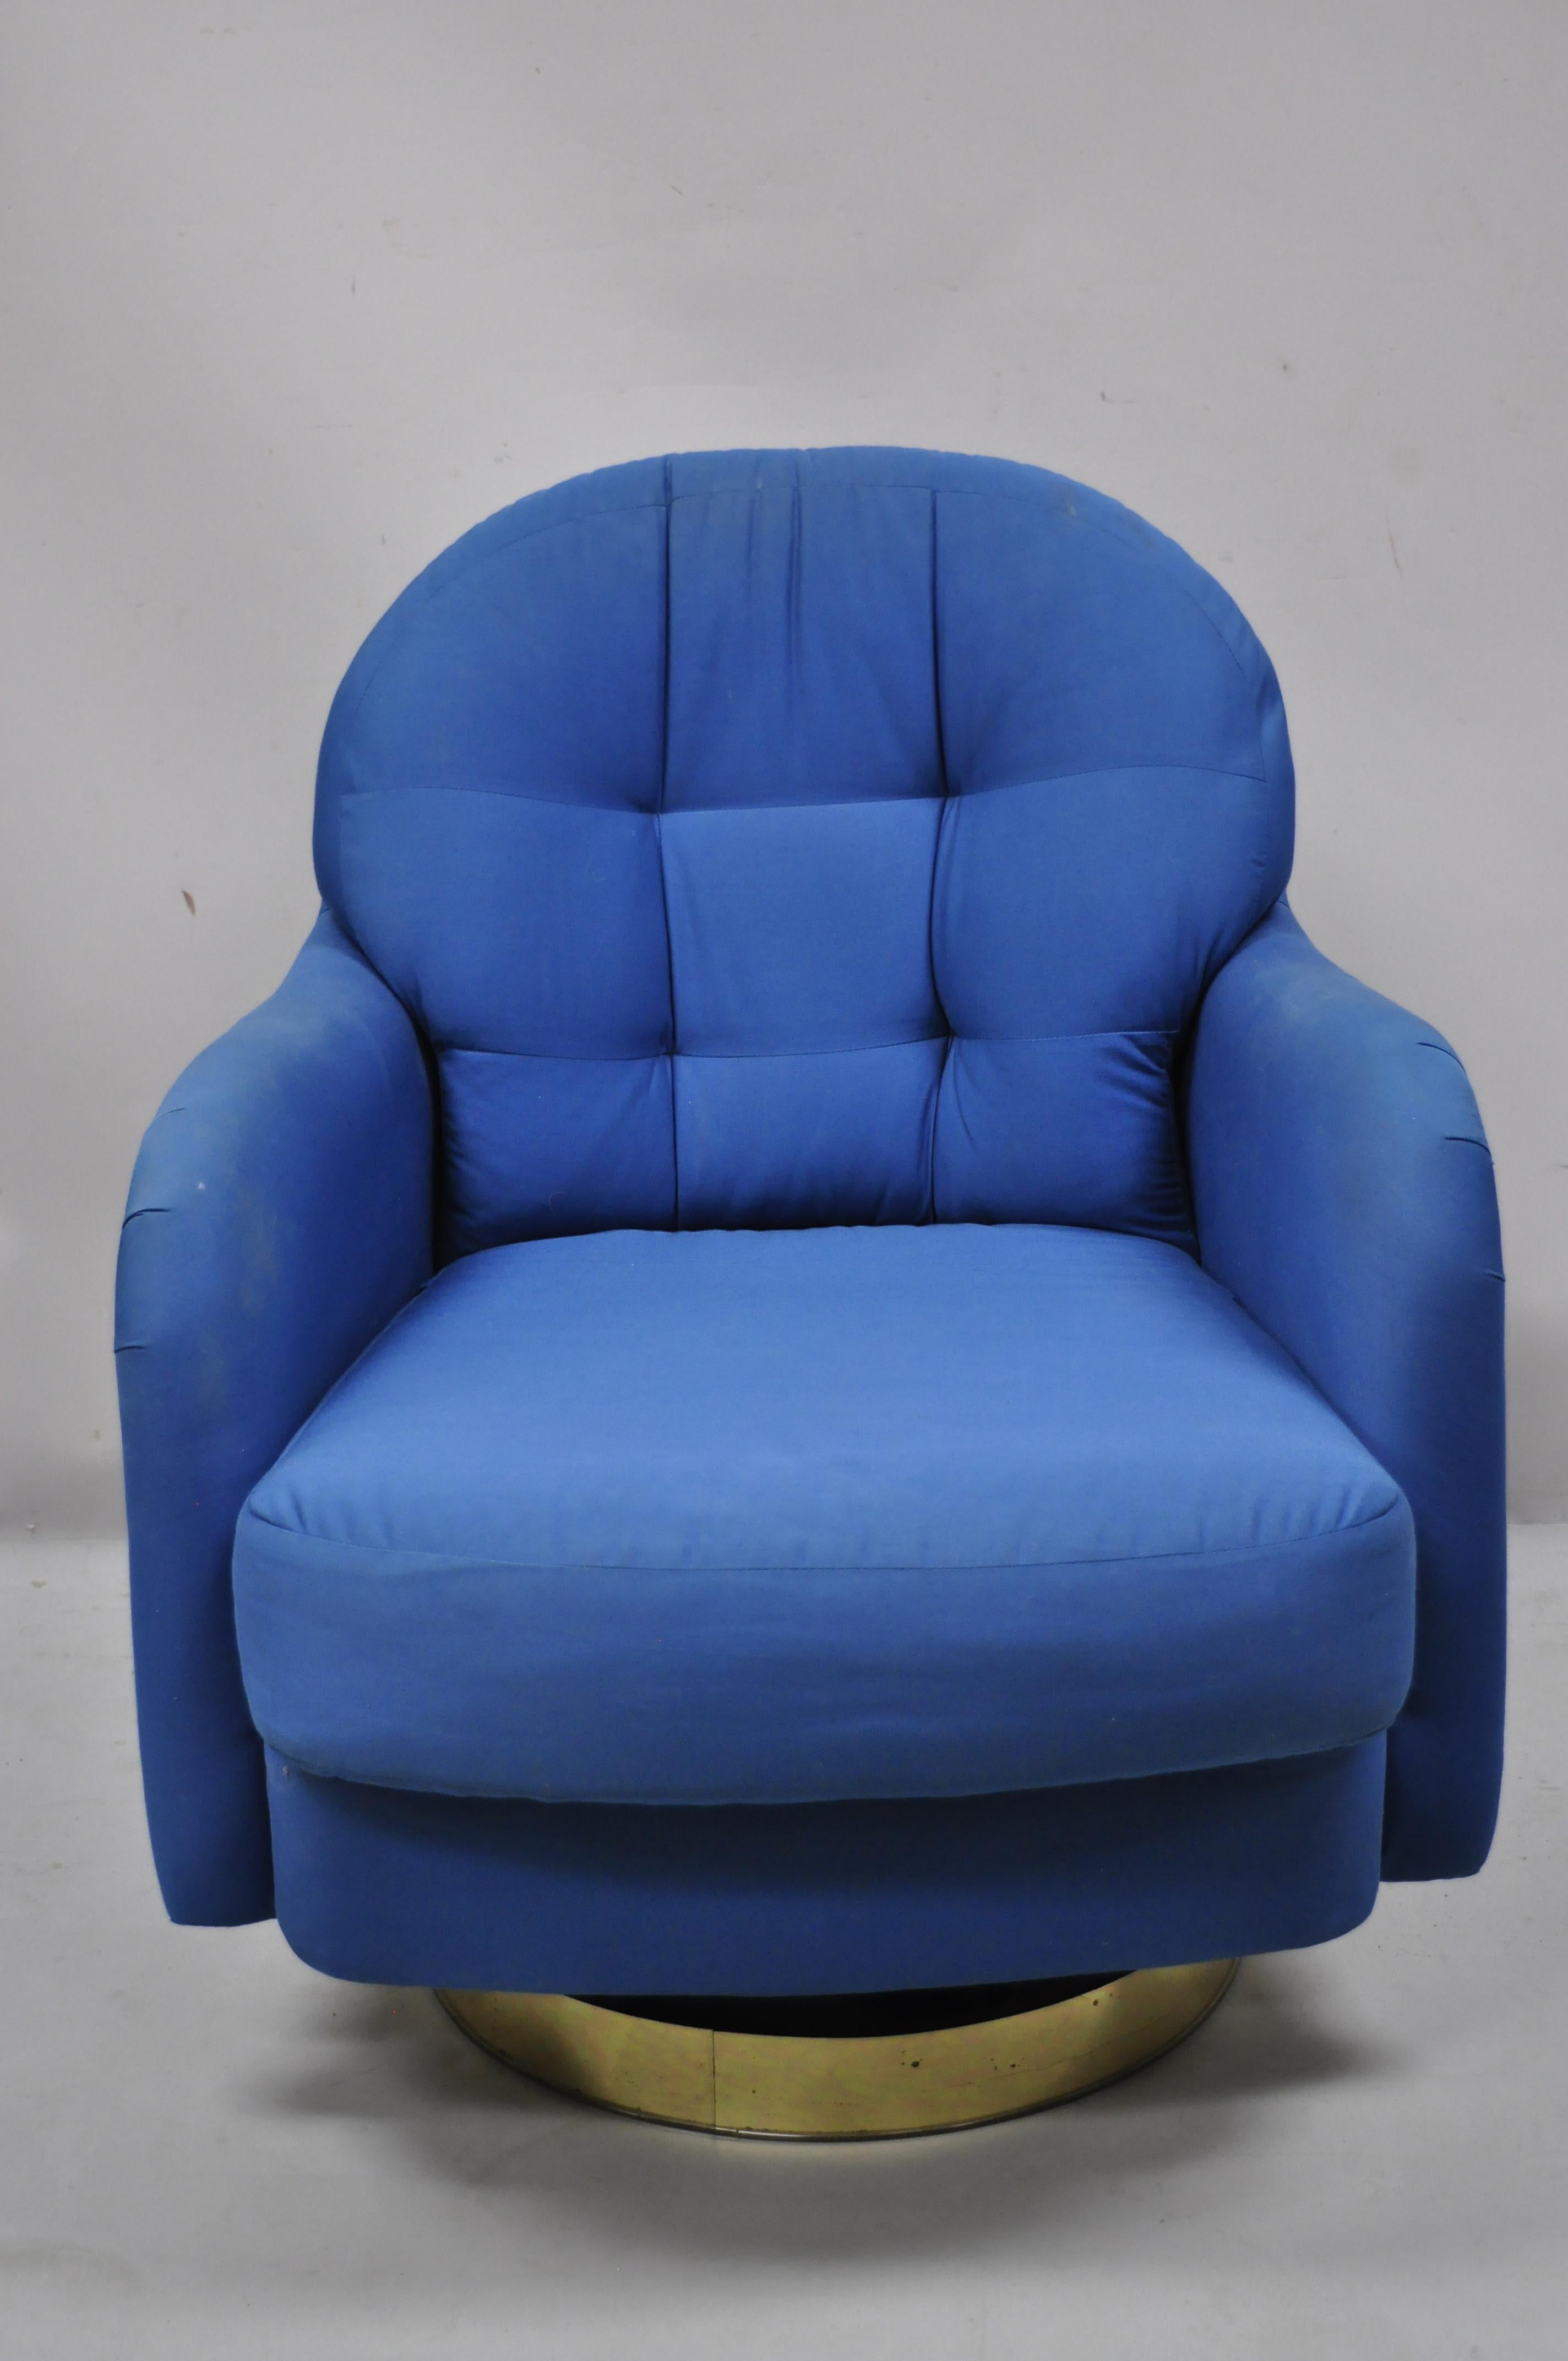 Milo Baughman for Thayer Coggin swivel tilt blue upholstered club lounge chair. Item features swivel and tilt seat, upholstered frame, original label, very nice vintage item, clean modernist lines, quality American craftsmanship, great style and